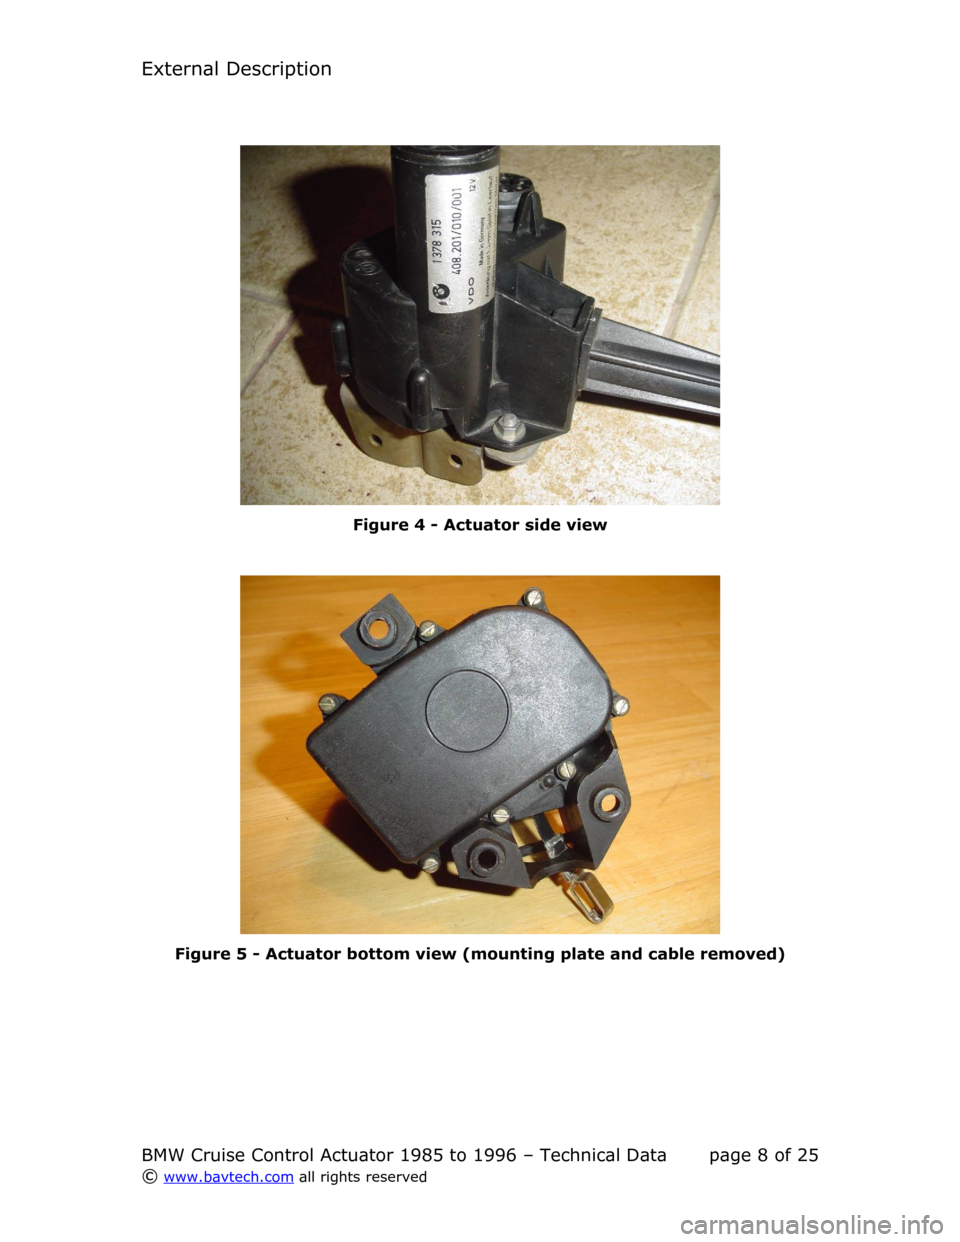 BMW 5 SERIES 1996 E34 Cruise Control Acutator External Description
Figure  4  - Actuator side view
Figure  5  - Actuator bottom view (mounting plate and cable removed)
BMW Cruise Control Actuator 1985 to 1996 – Technical Data page  8  of  25
©